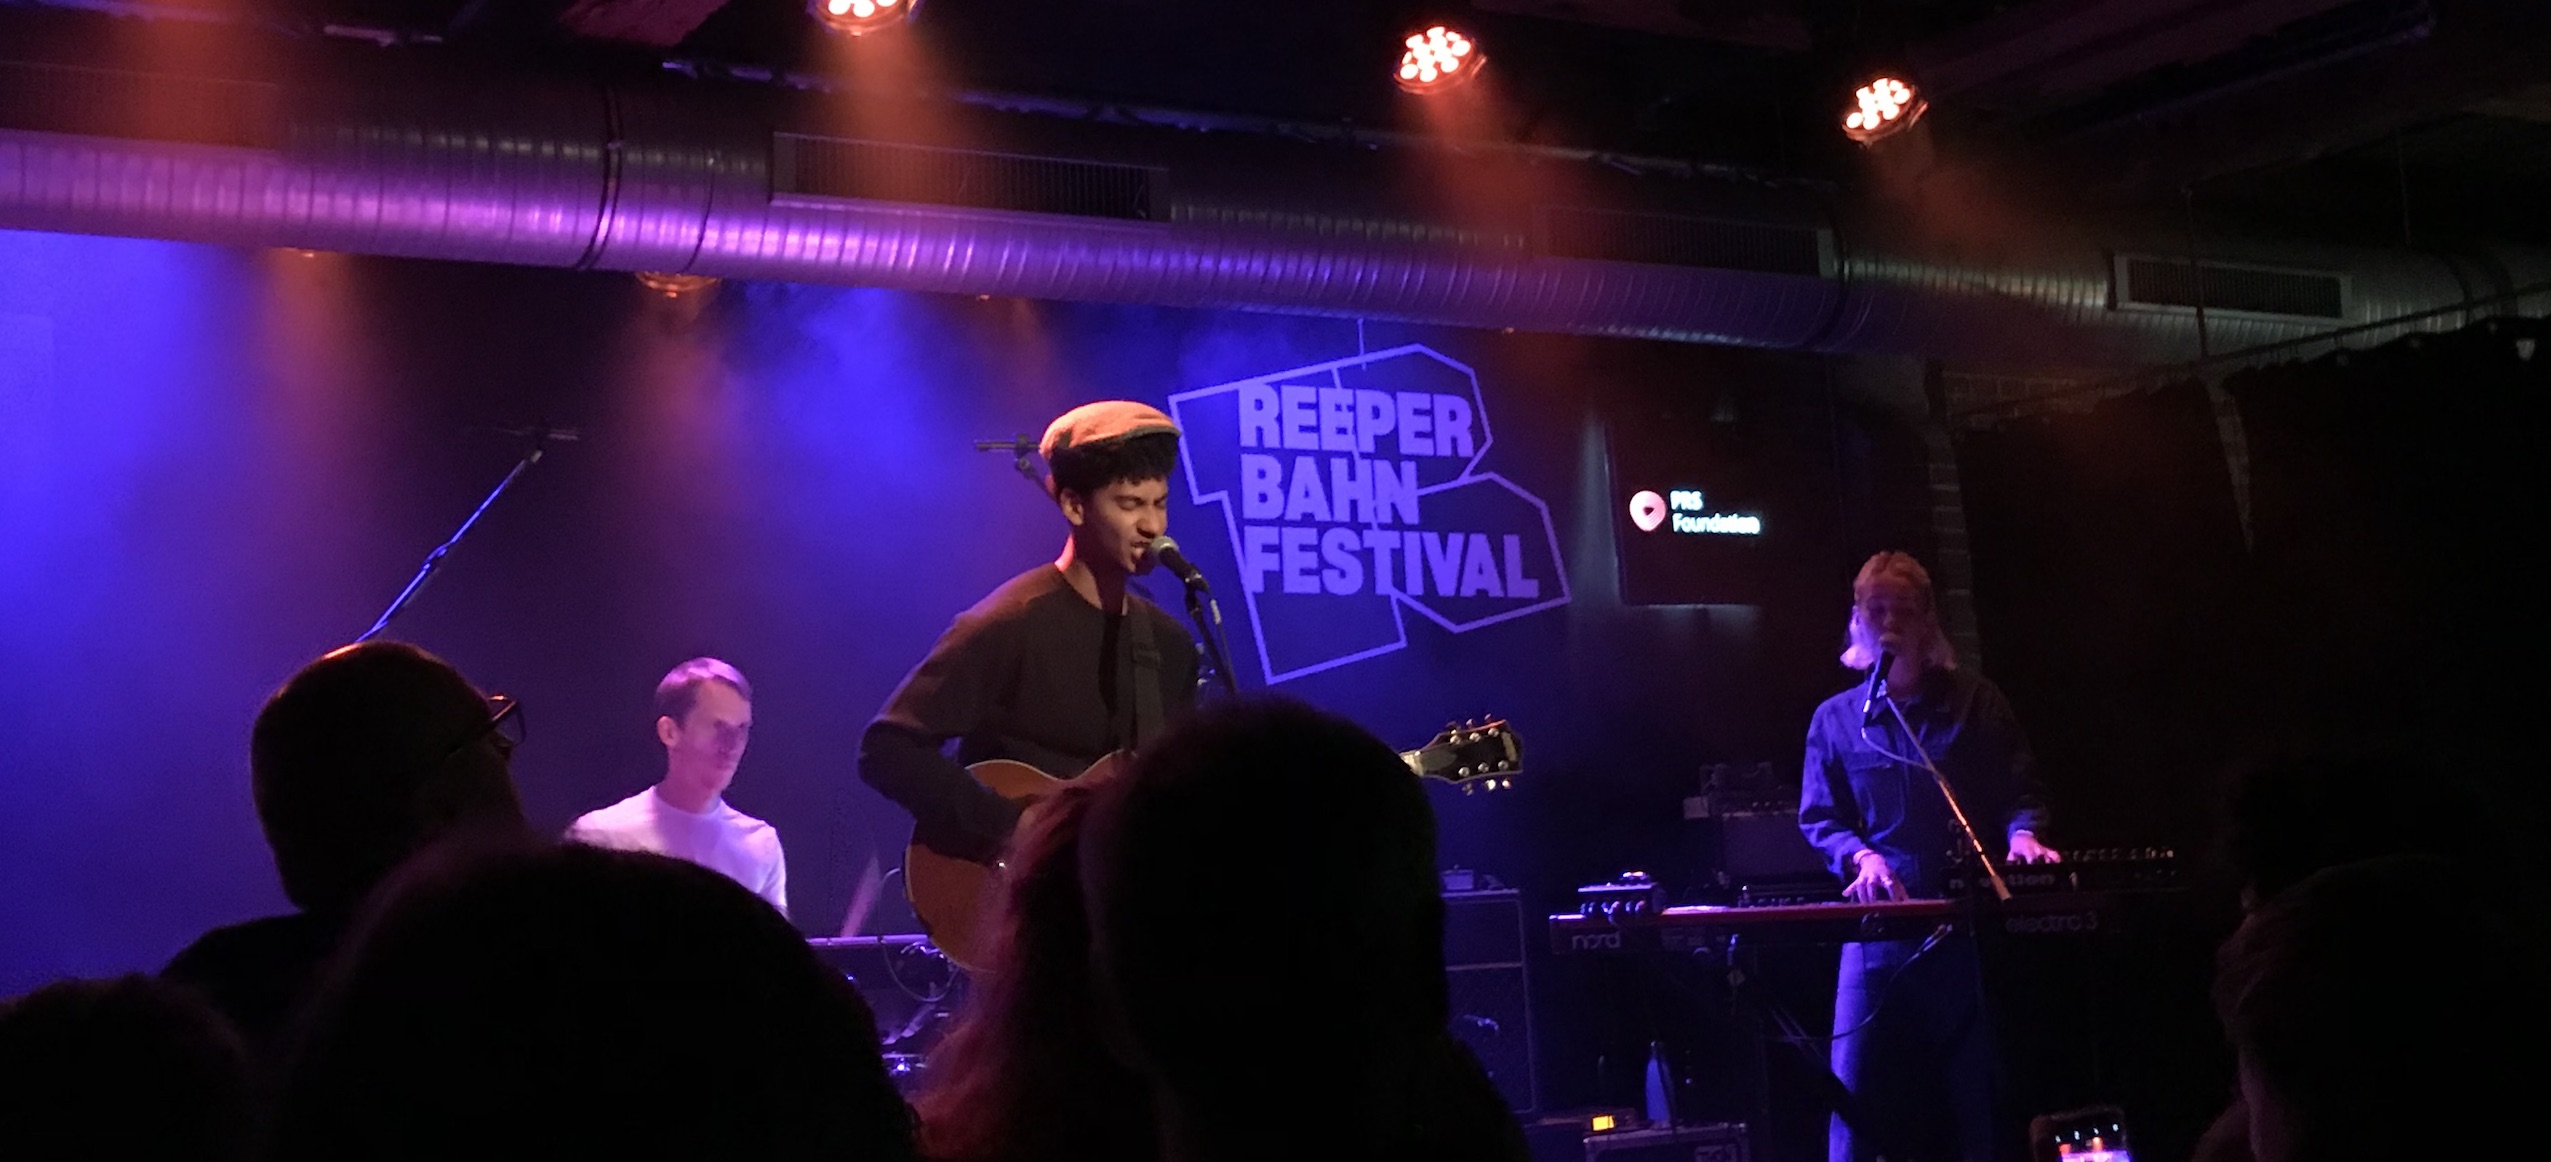 Reeperbahn Festival 2019 – Review Teil 2: Top 10 Acts & Hamburg Sound